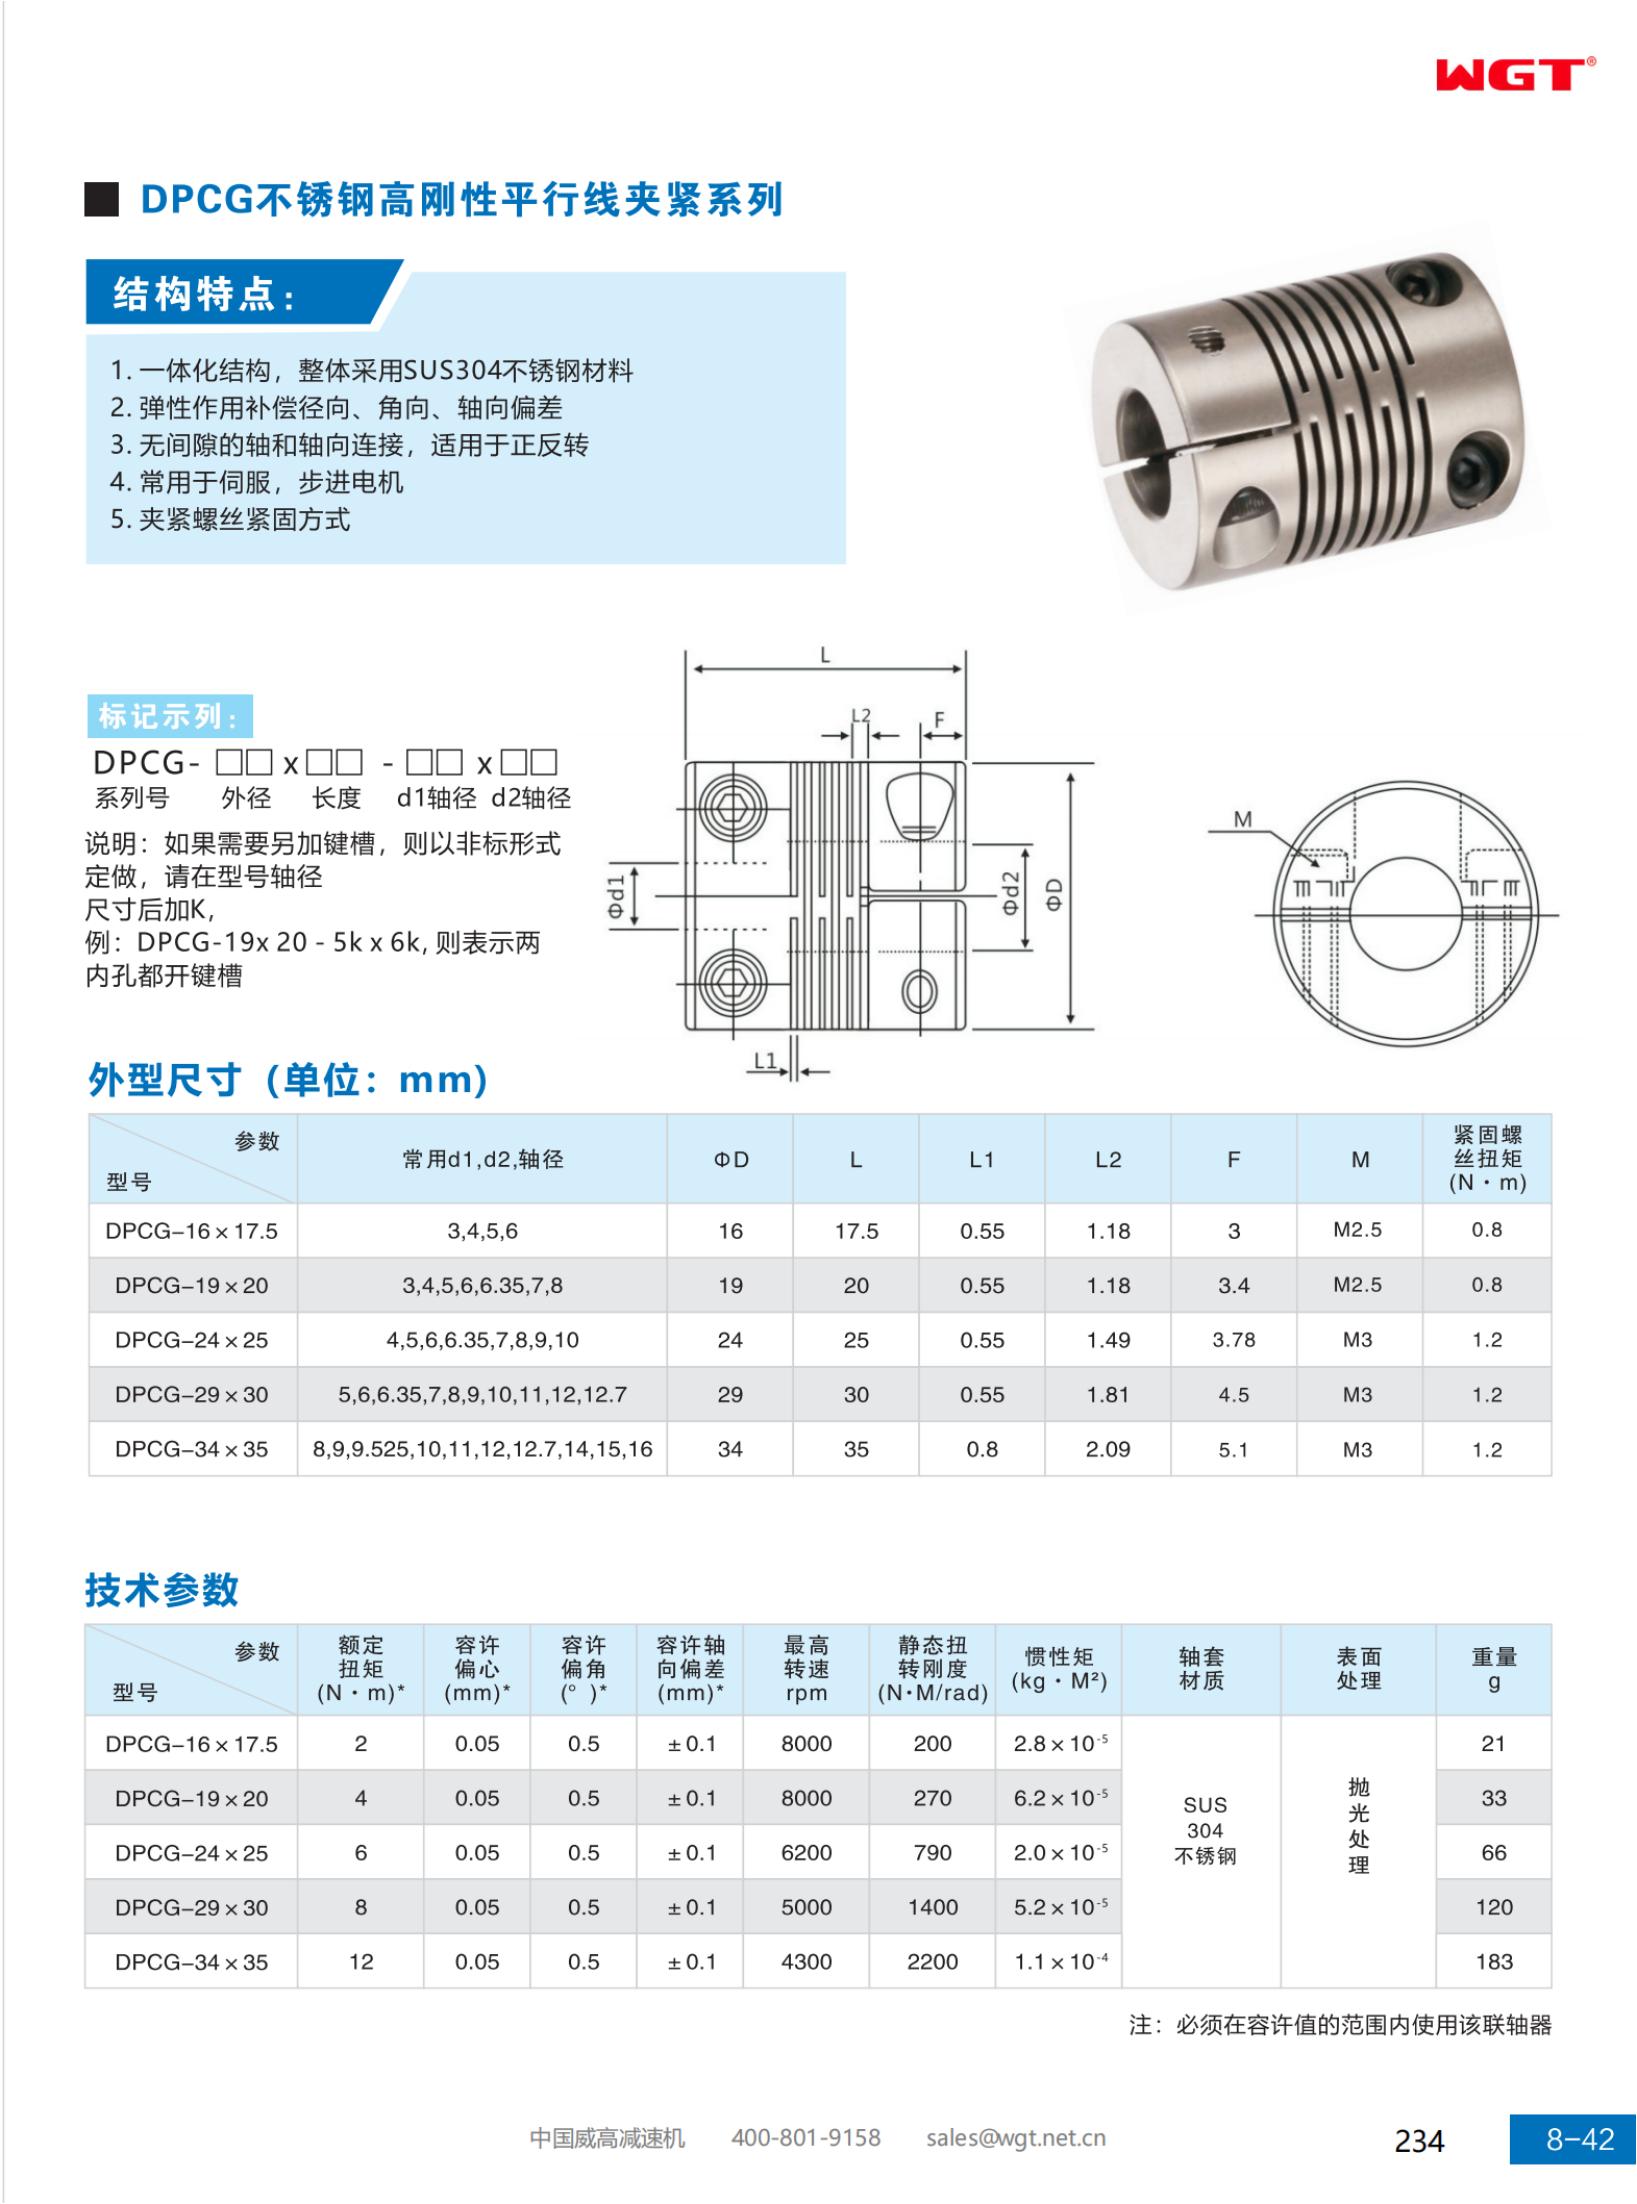 DPCG Stainless Steel High Rigidity Parallel Line Clamping Series